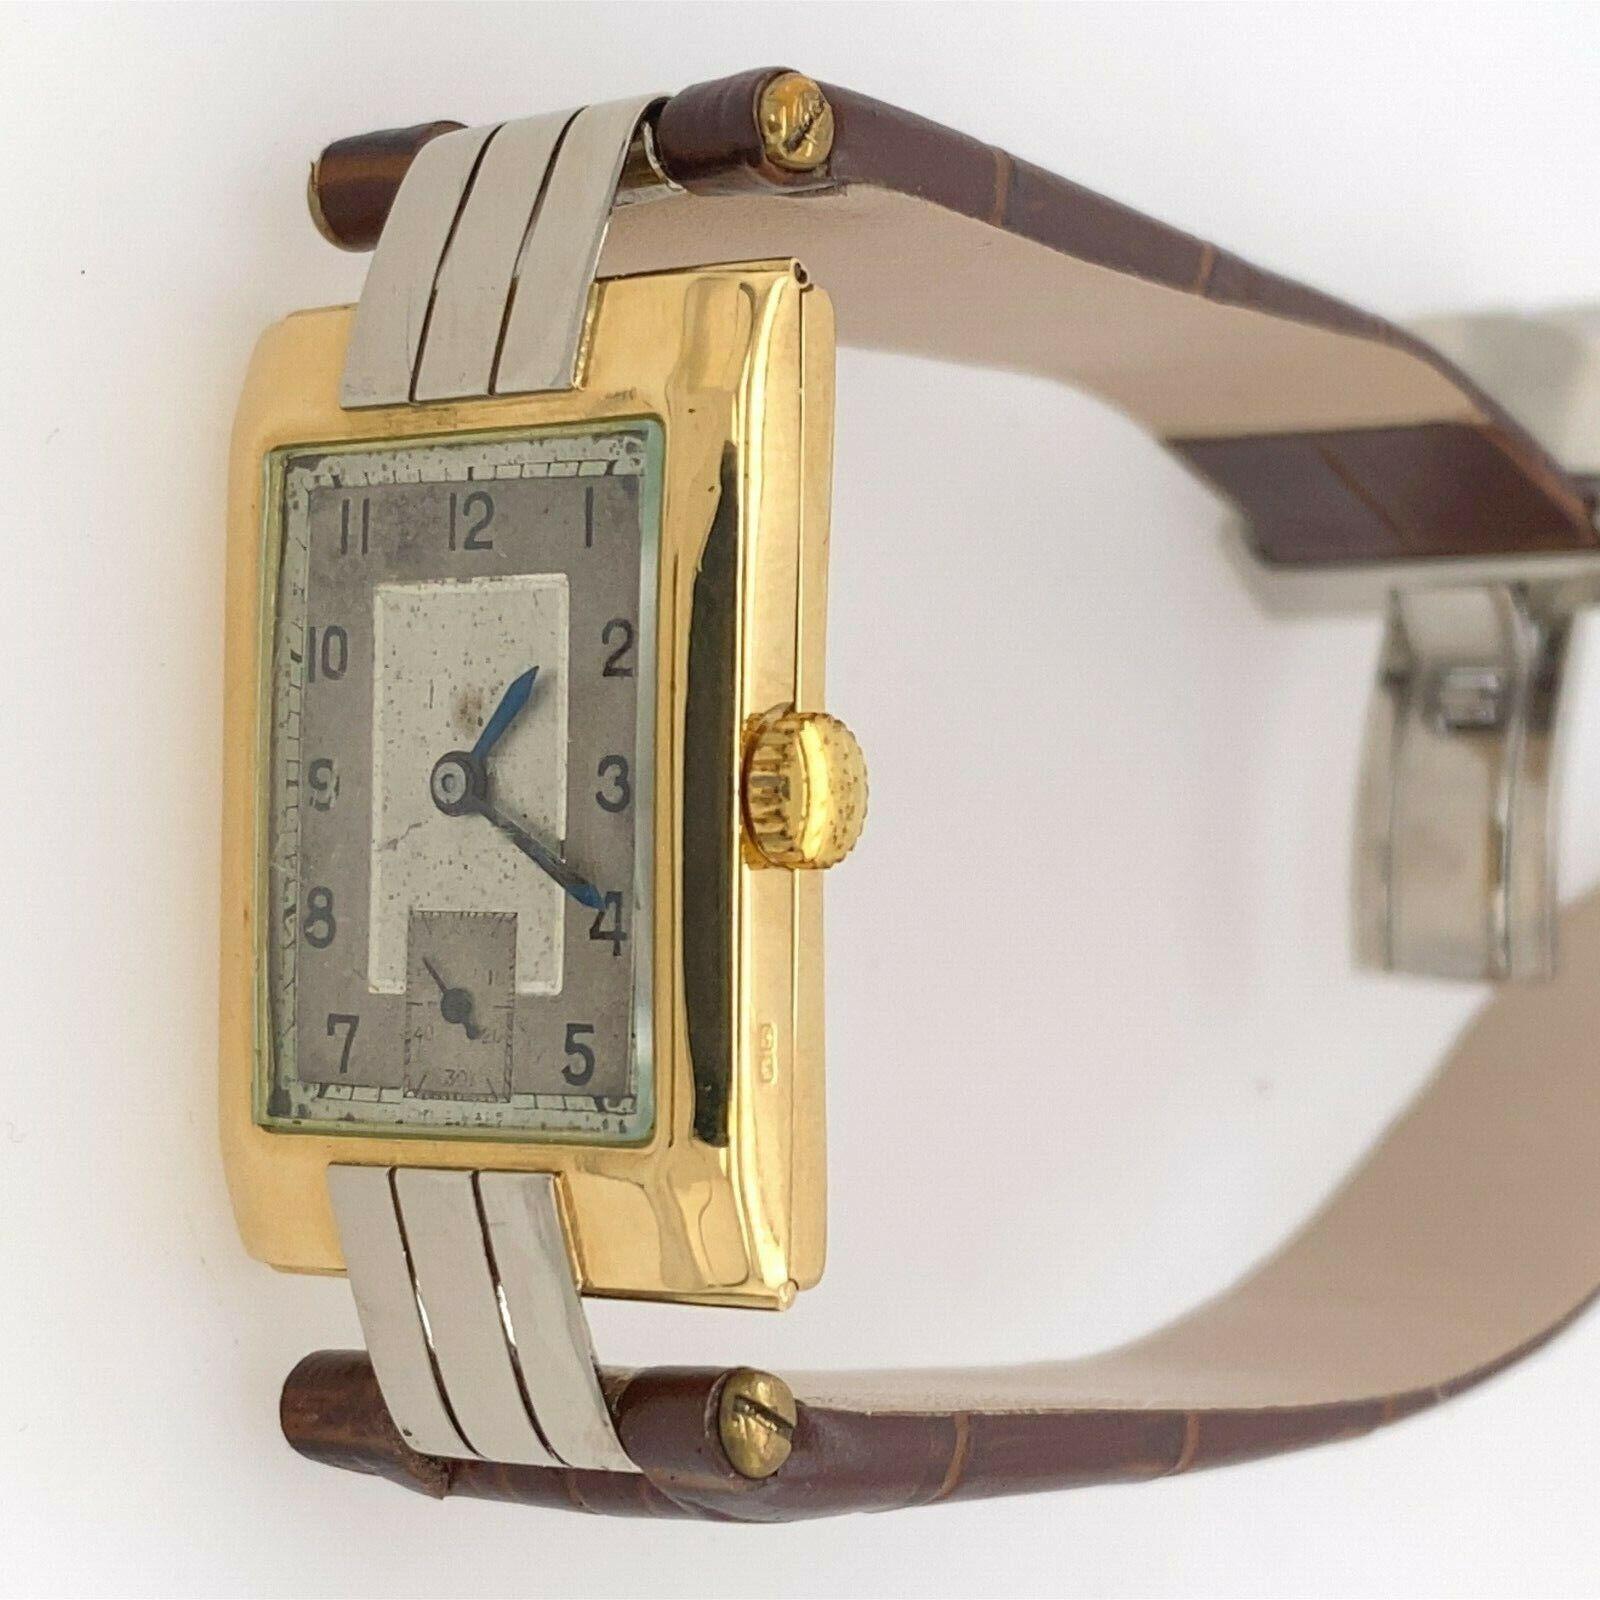 18ct Yellow & White Gold, 18 Jewel, Tank Watch – Swiss Made

Additional Information:
Case Size: 149mm
Total Weight: 39g
18ct Gold Hallmark
Made in Switzerland
In perfect working condition
SMS3255